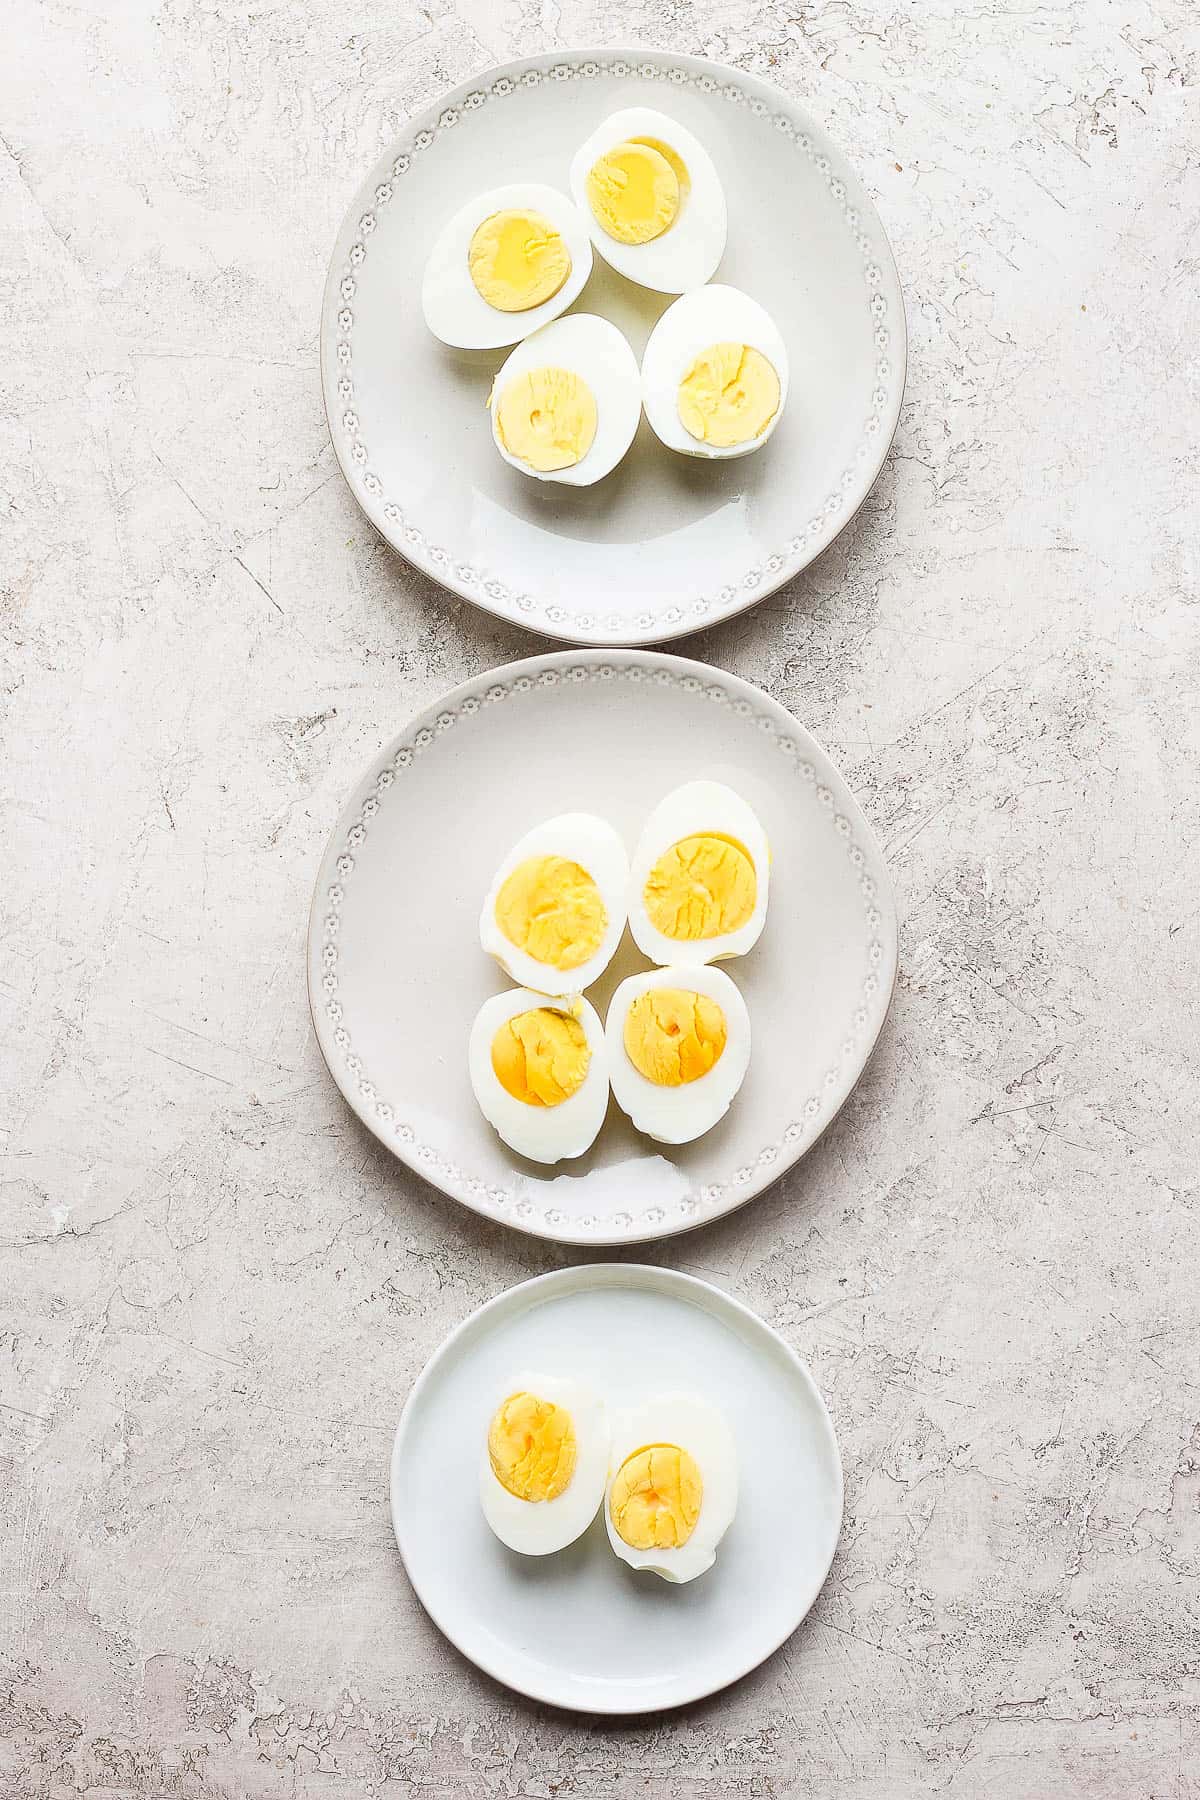 Three plates, in a line from the top to the bottom.  Each plate has two hard boiled eggs cut lengthwise, yolk side up.